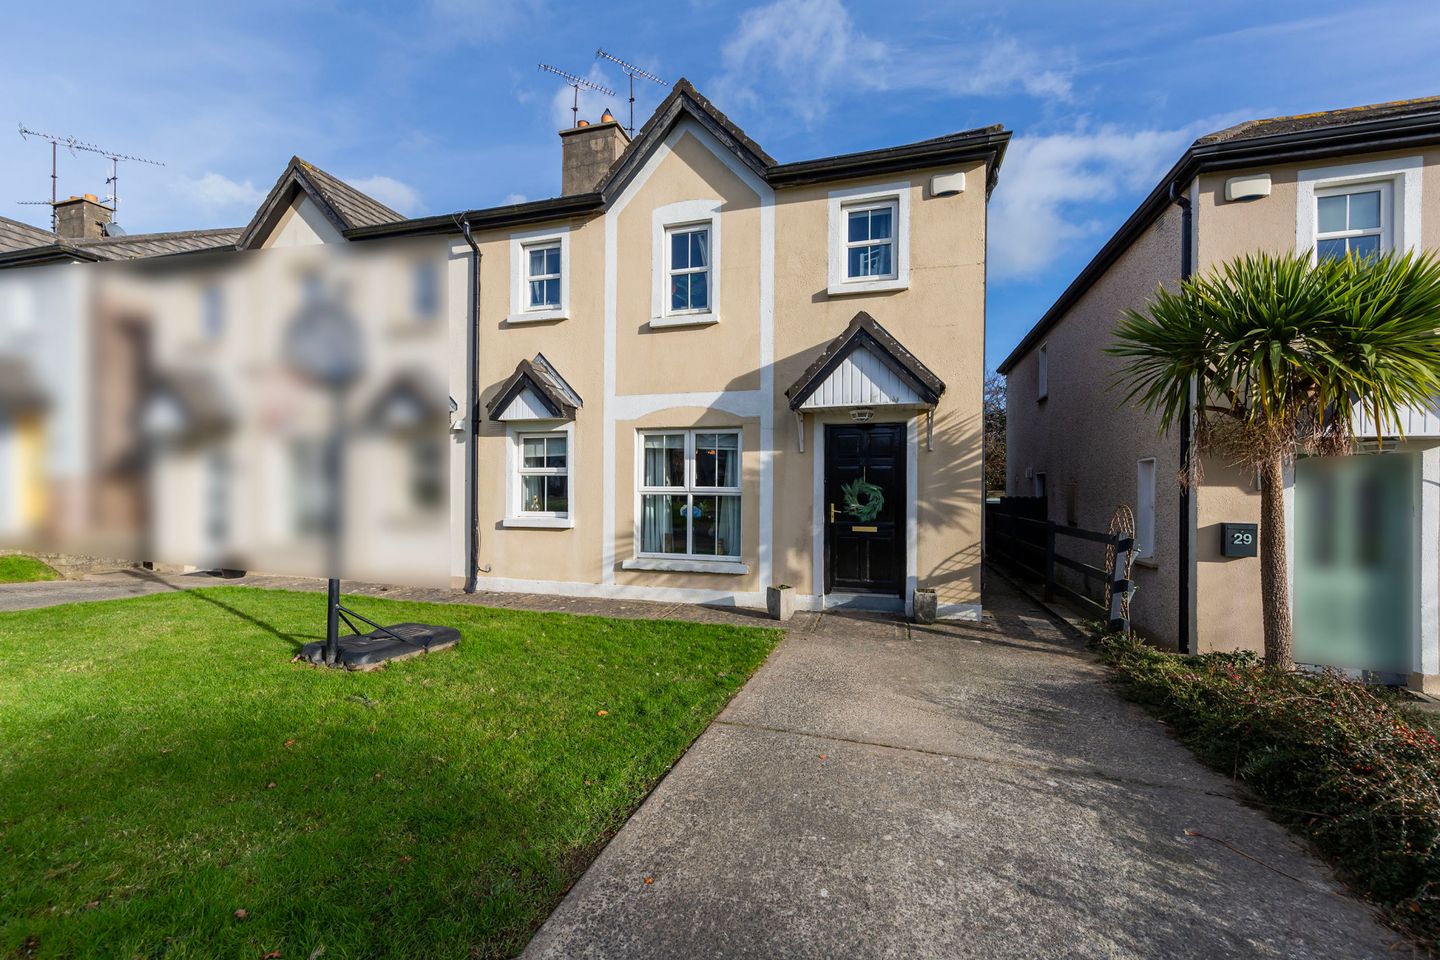 28 Coolcotts Court, Wexford Town, Wexford, Y35E8P6